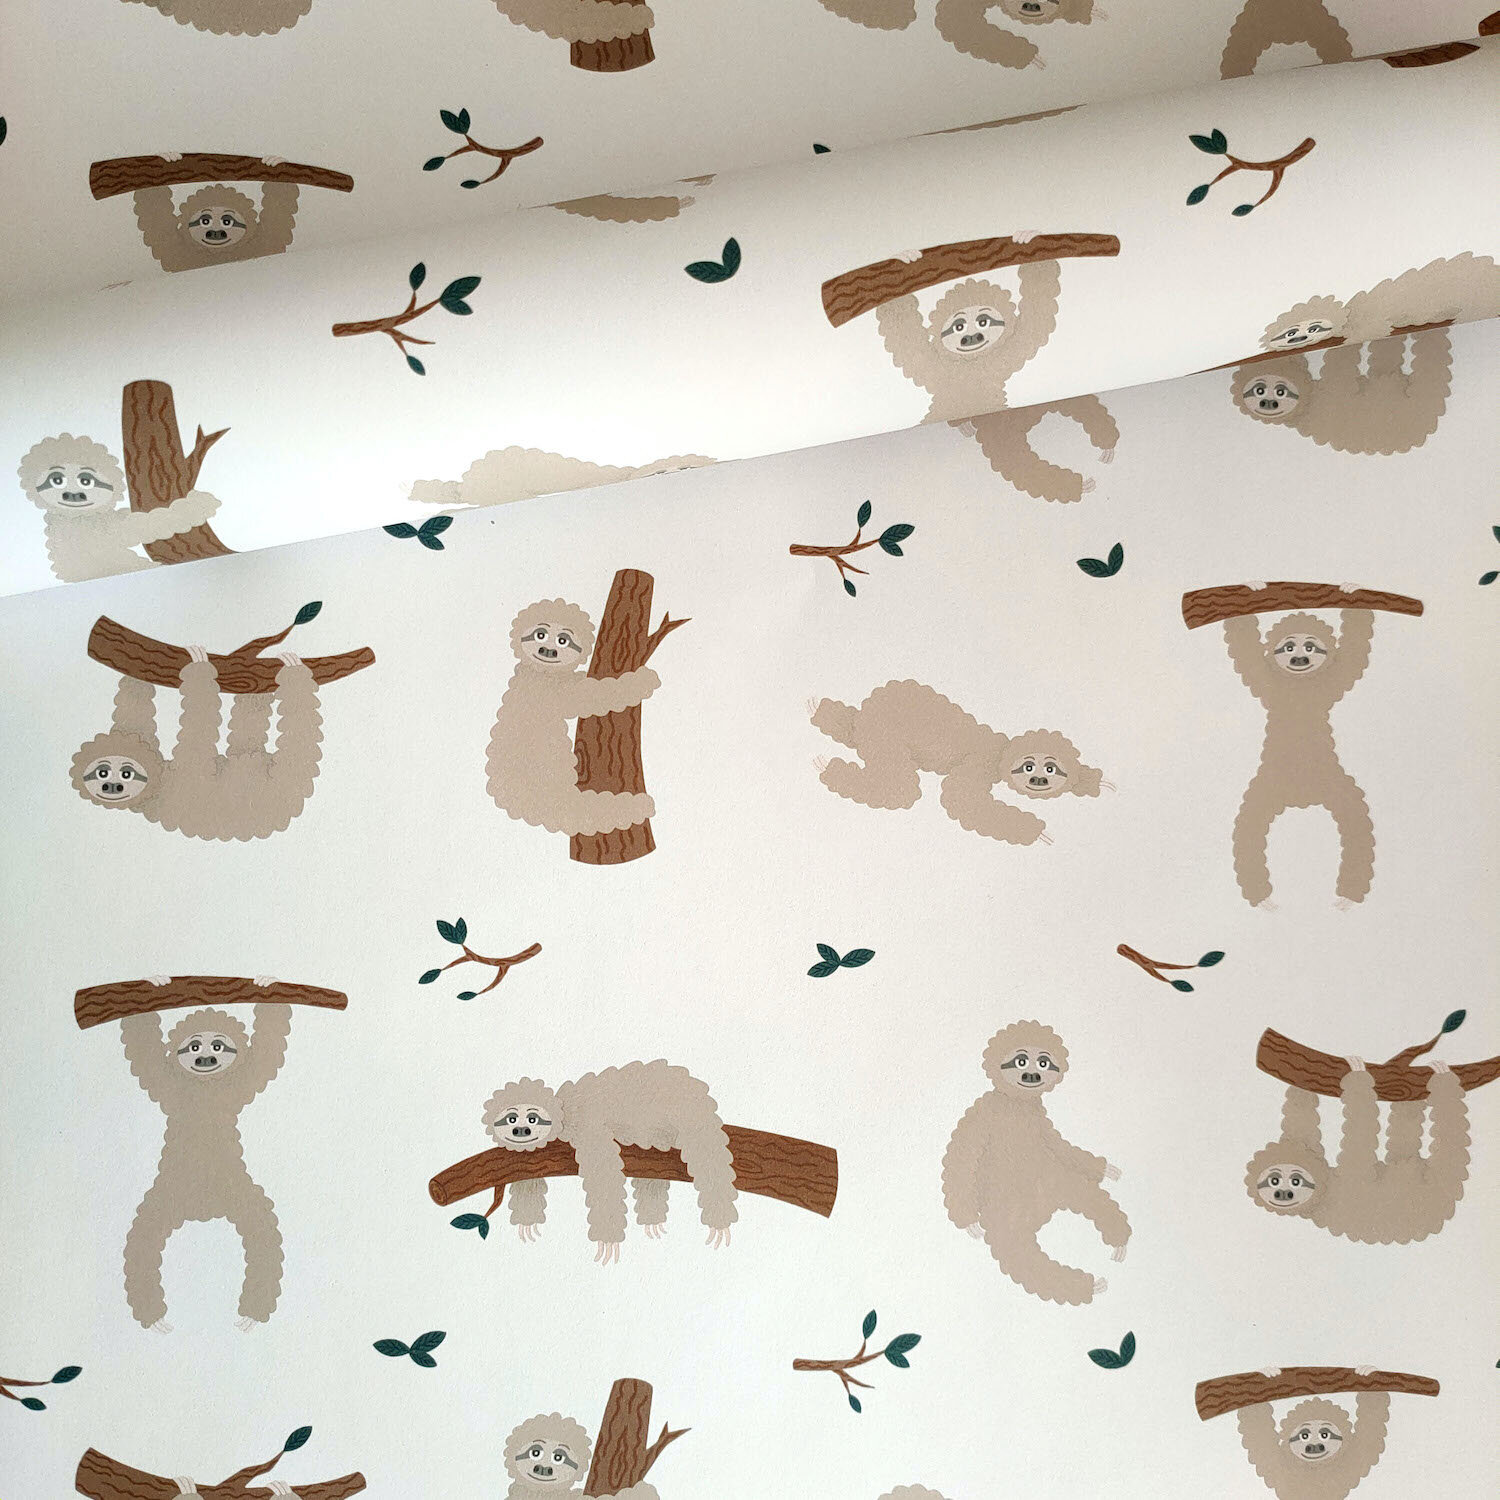 Sloth Wrapping Paper Photo 1.jpg